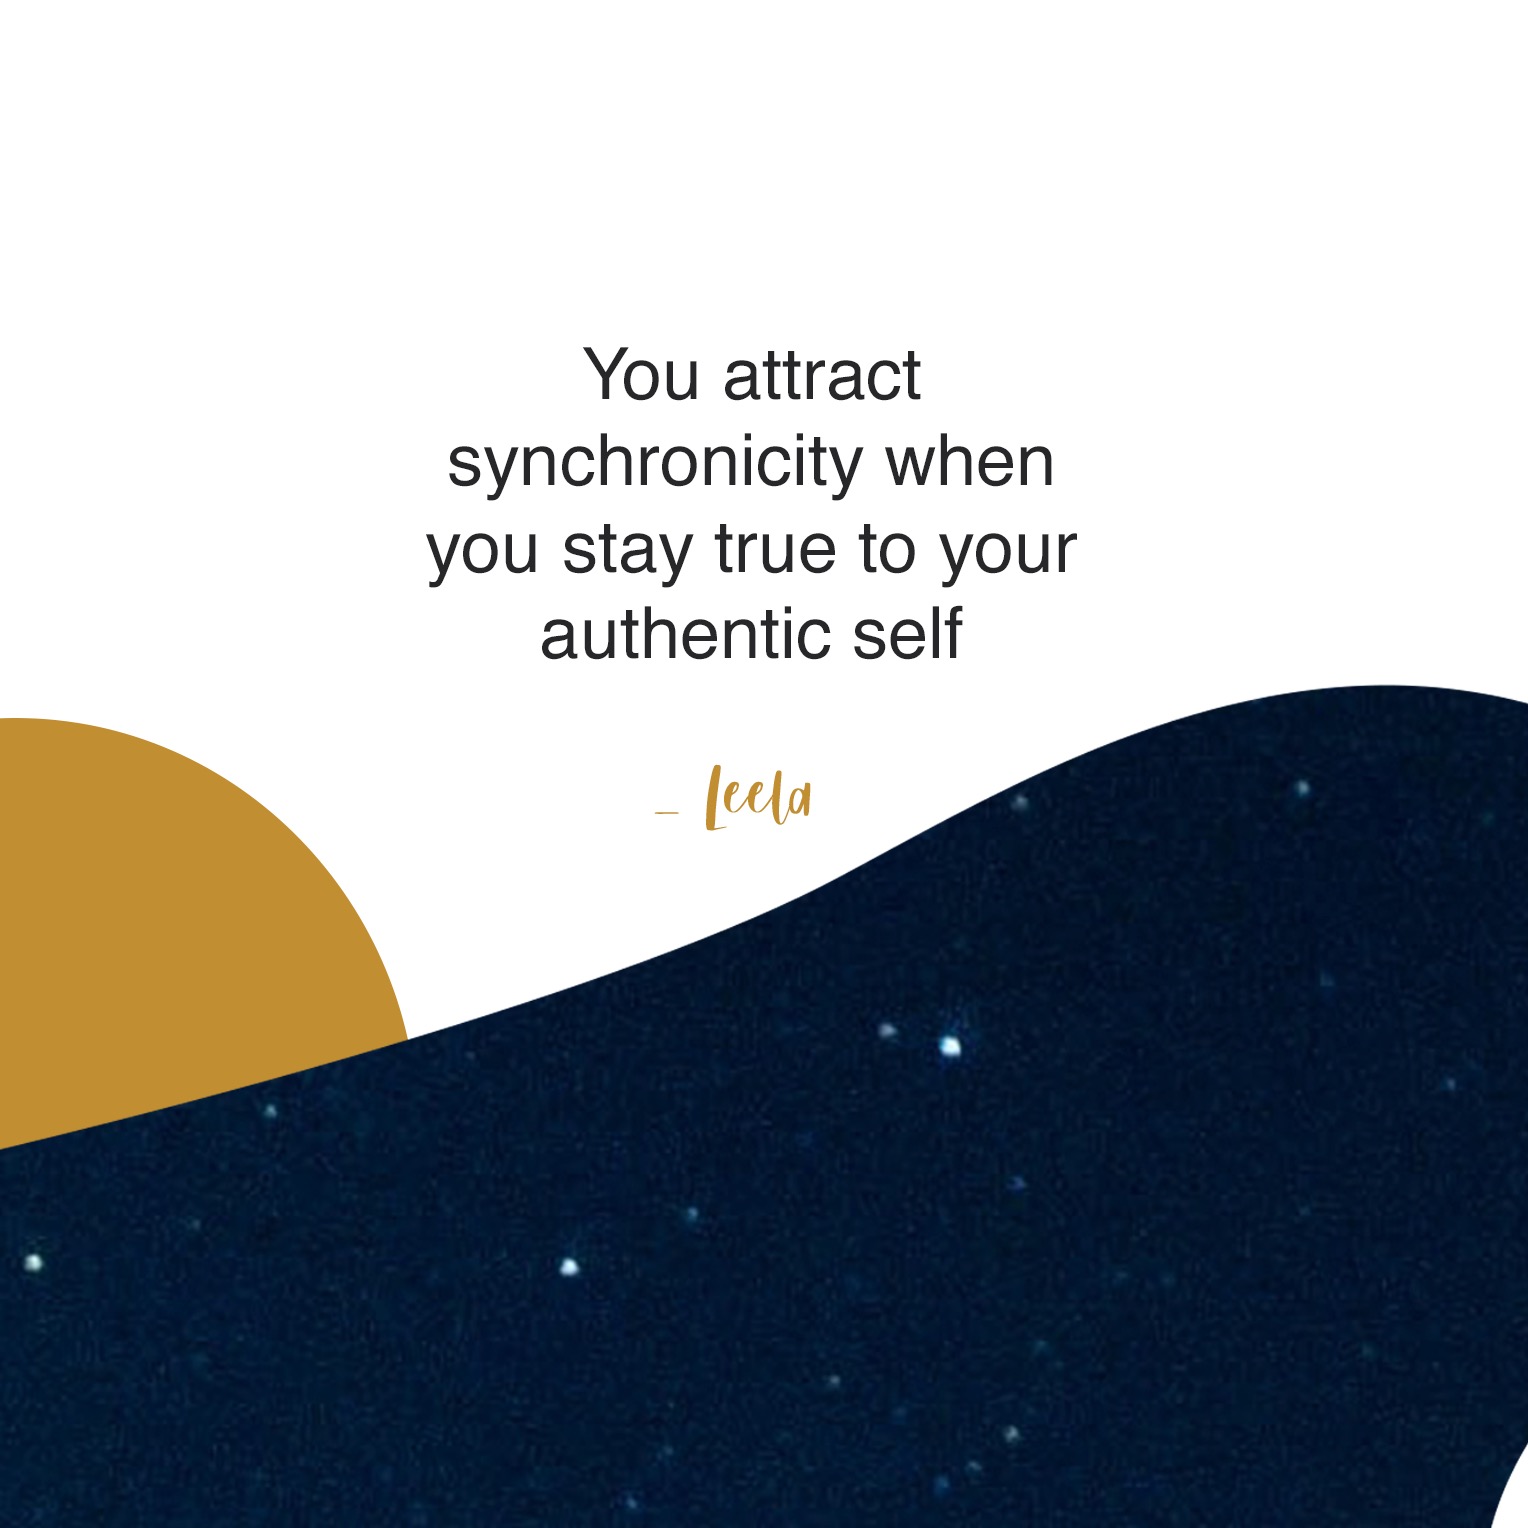 lifestyle redesign  - 11 - You Attract Synchronicity When you Stay True to your Authentic Self